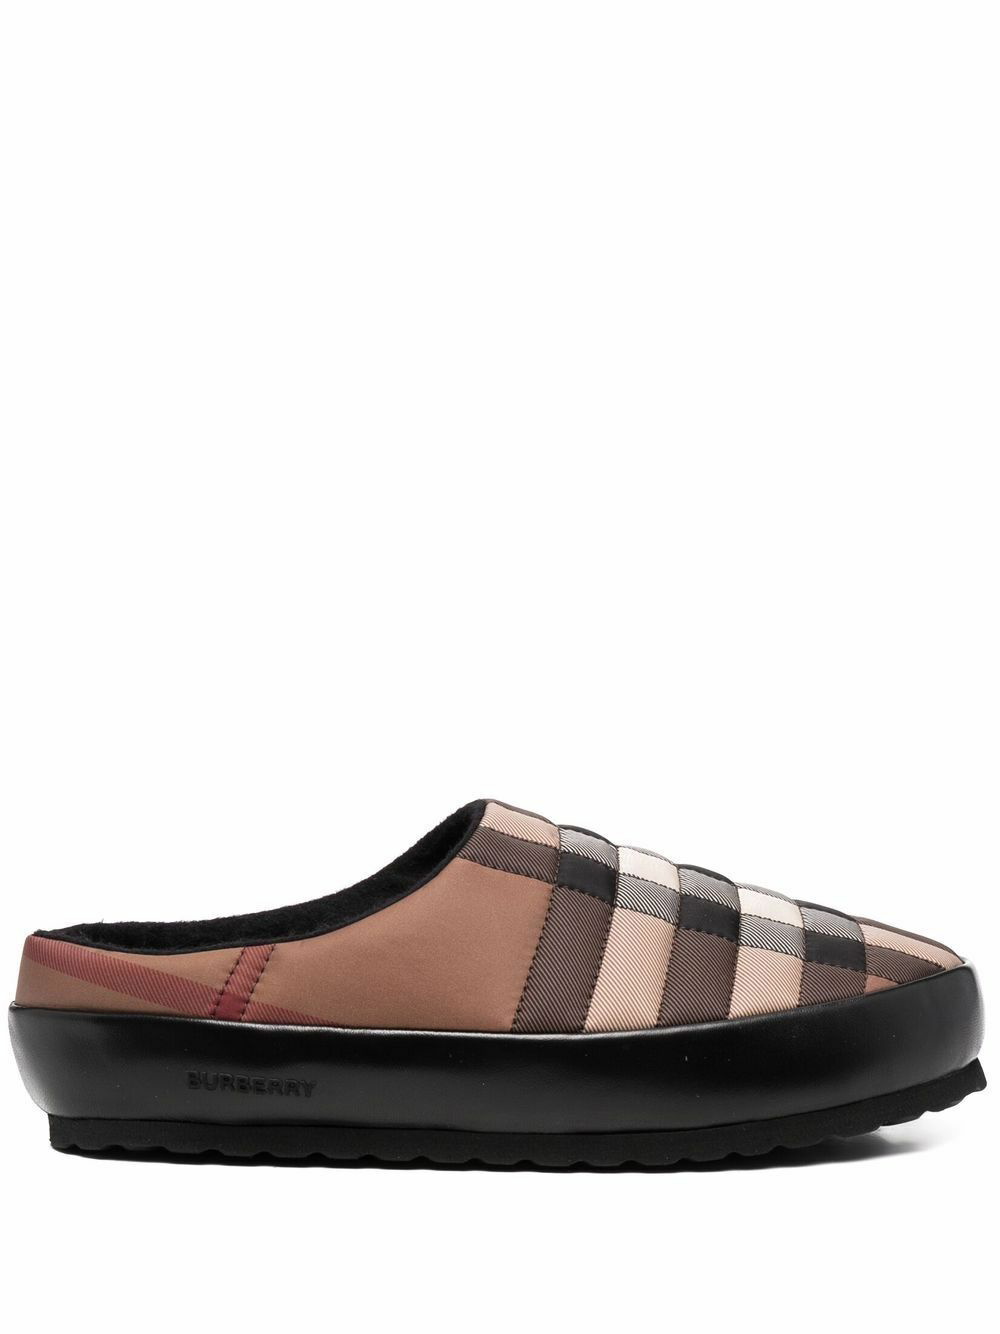 Photo: BURBERRY - Checked Slippers